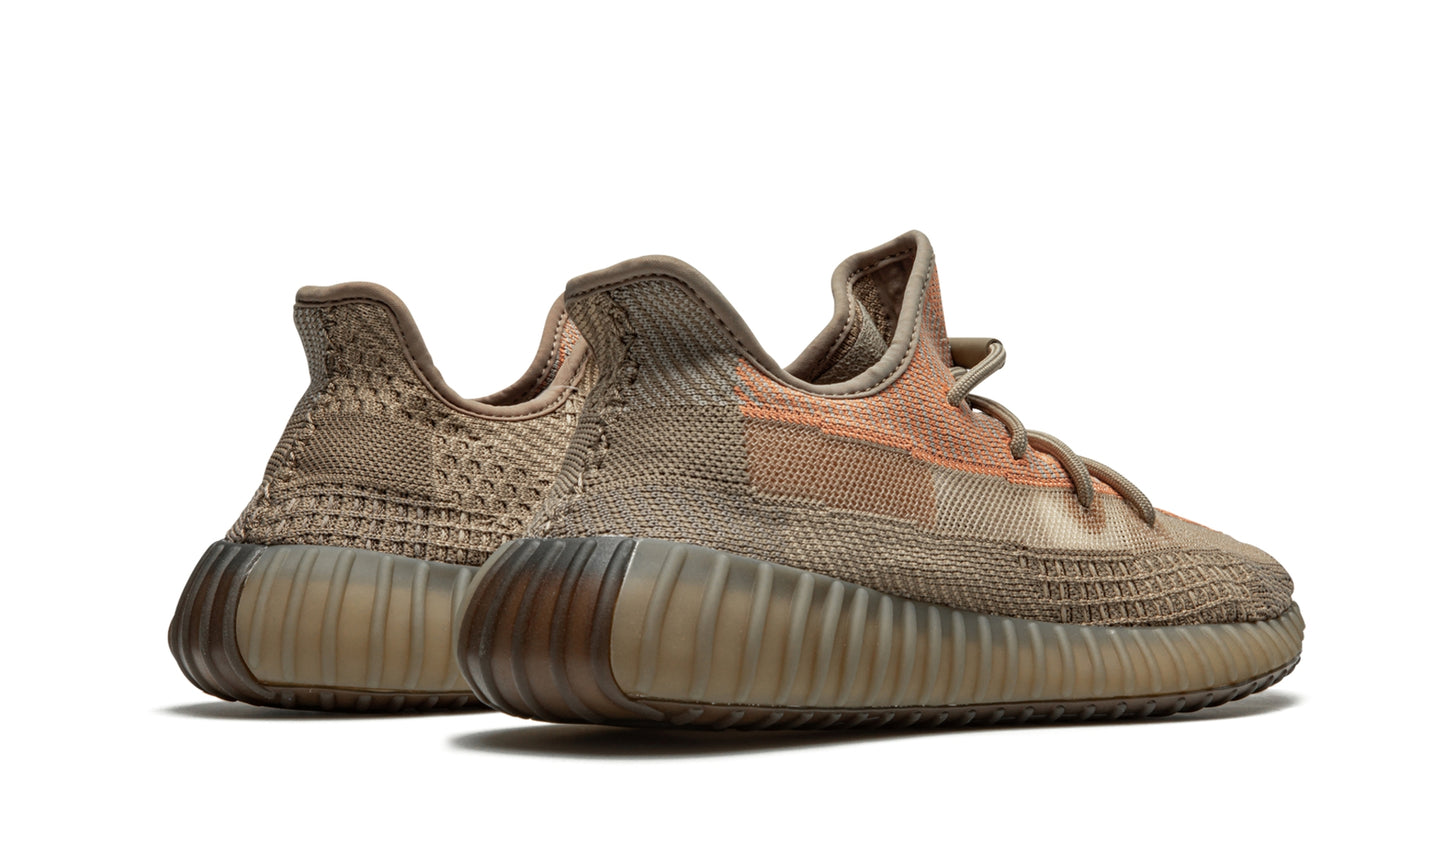 Adidas Yeezy Boost 350 V2 Sand Taupe